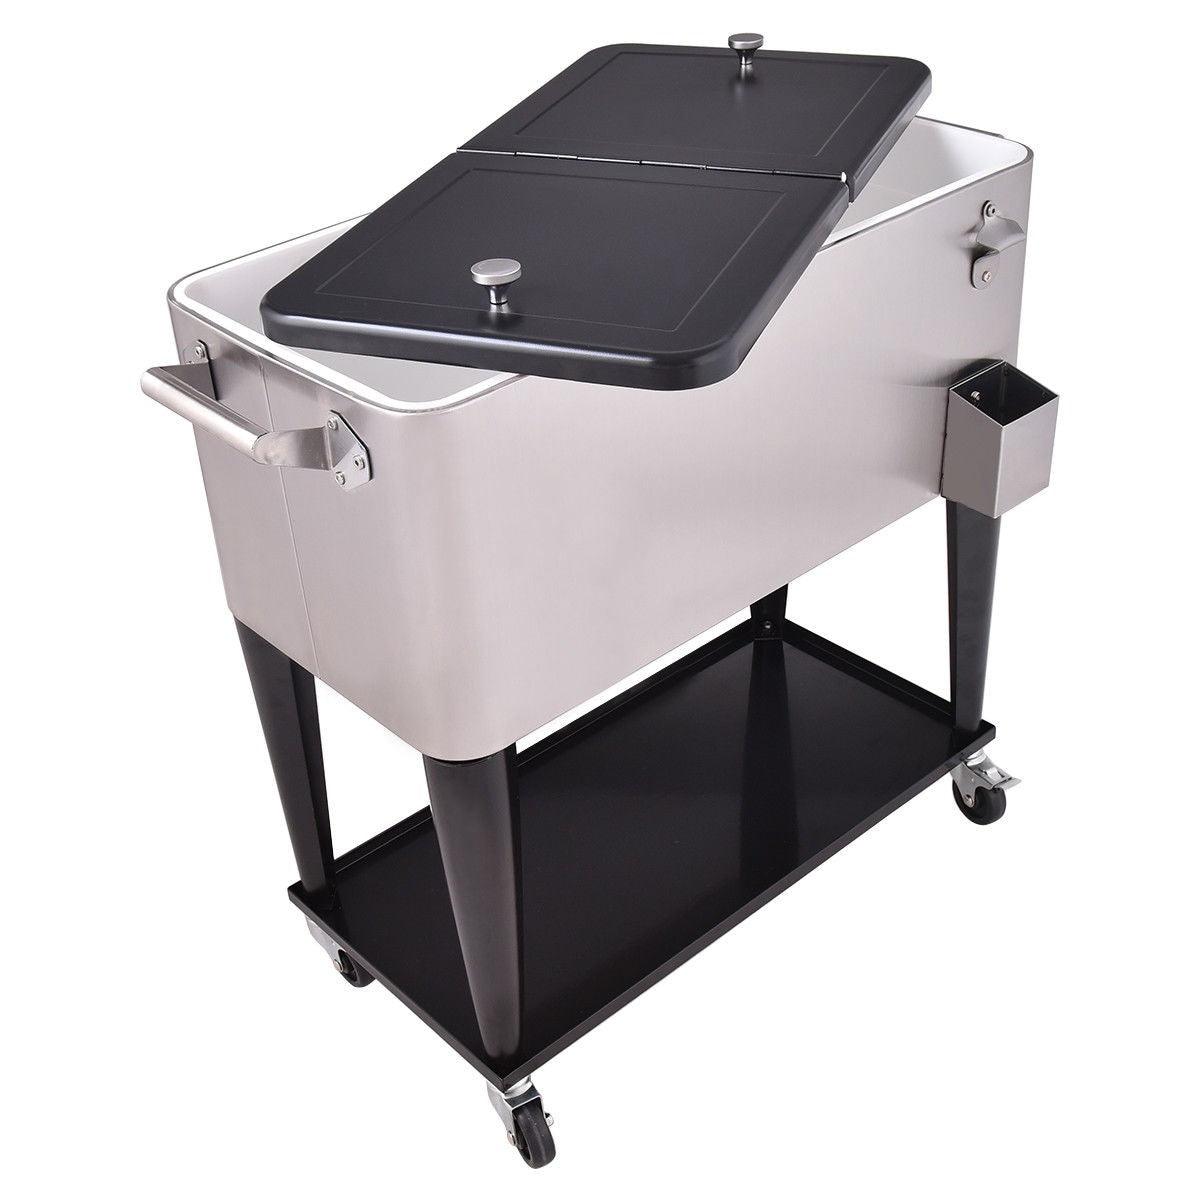 80 Quart Patio Rolling Stainless Steel Ice Beverage Cooler 36902714 - YOURISHOP.COM